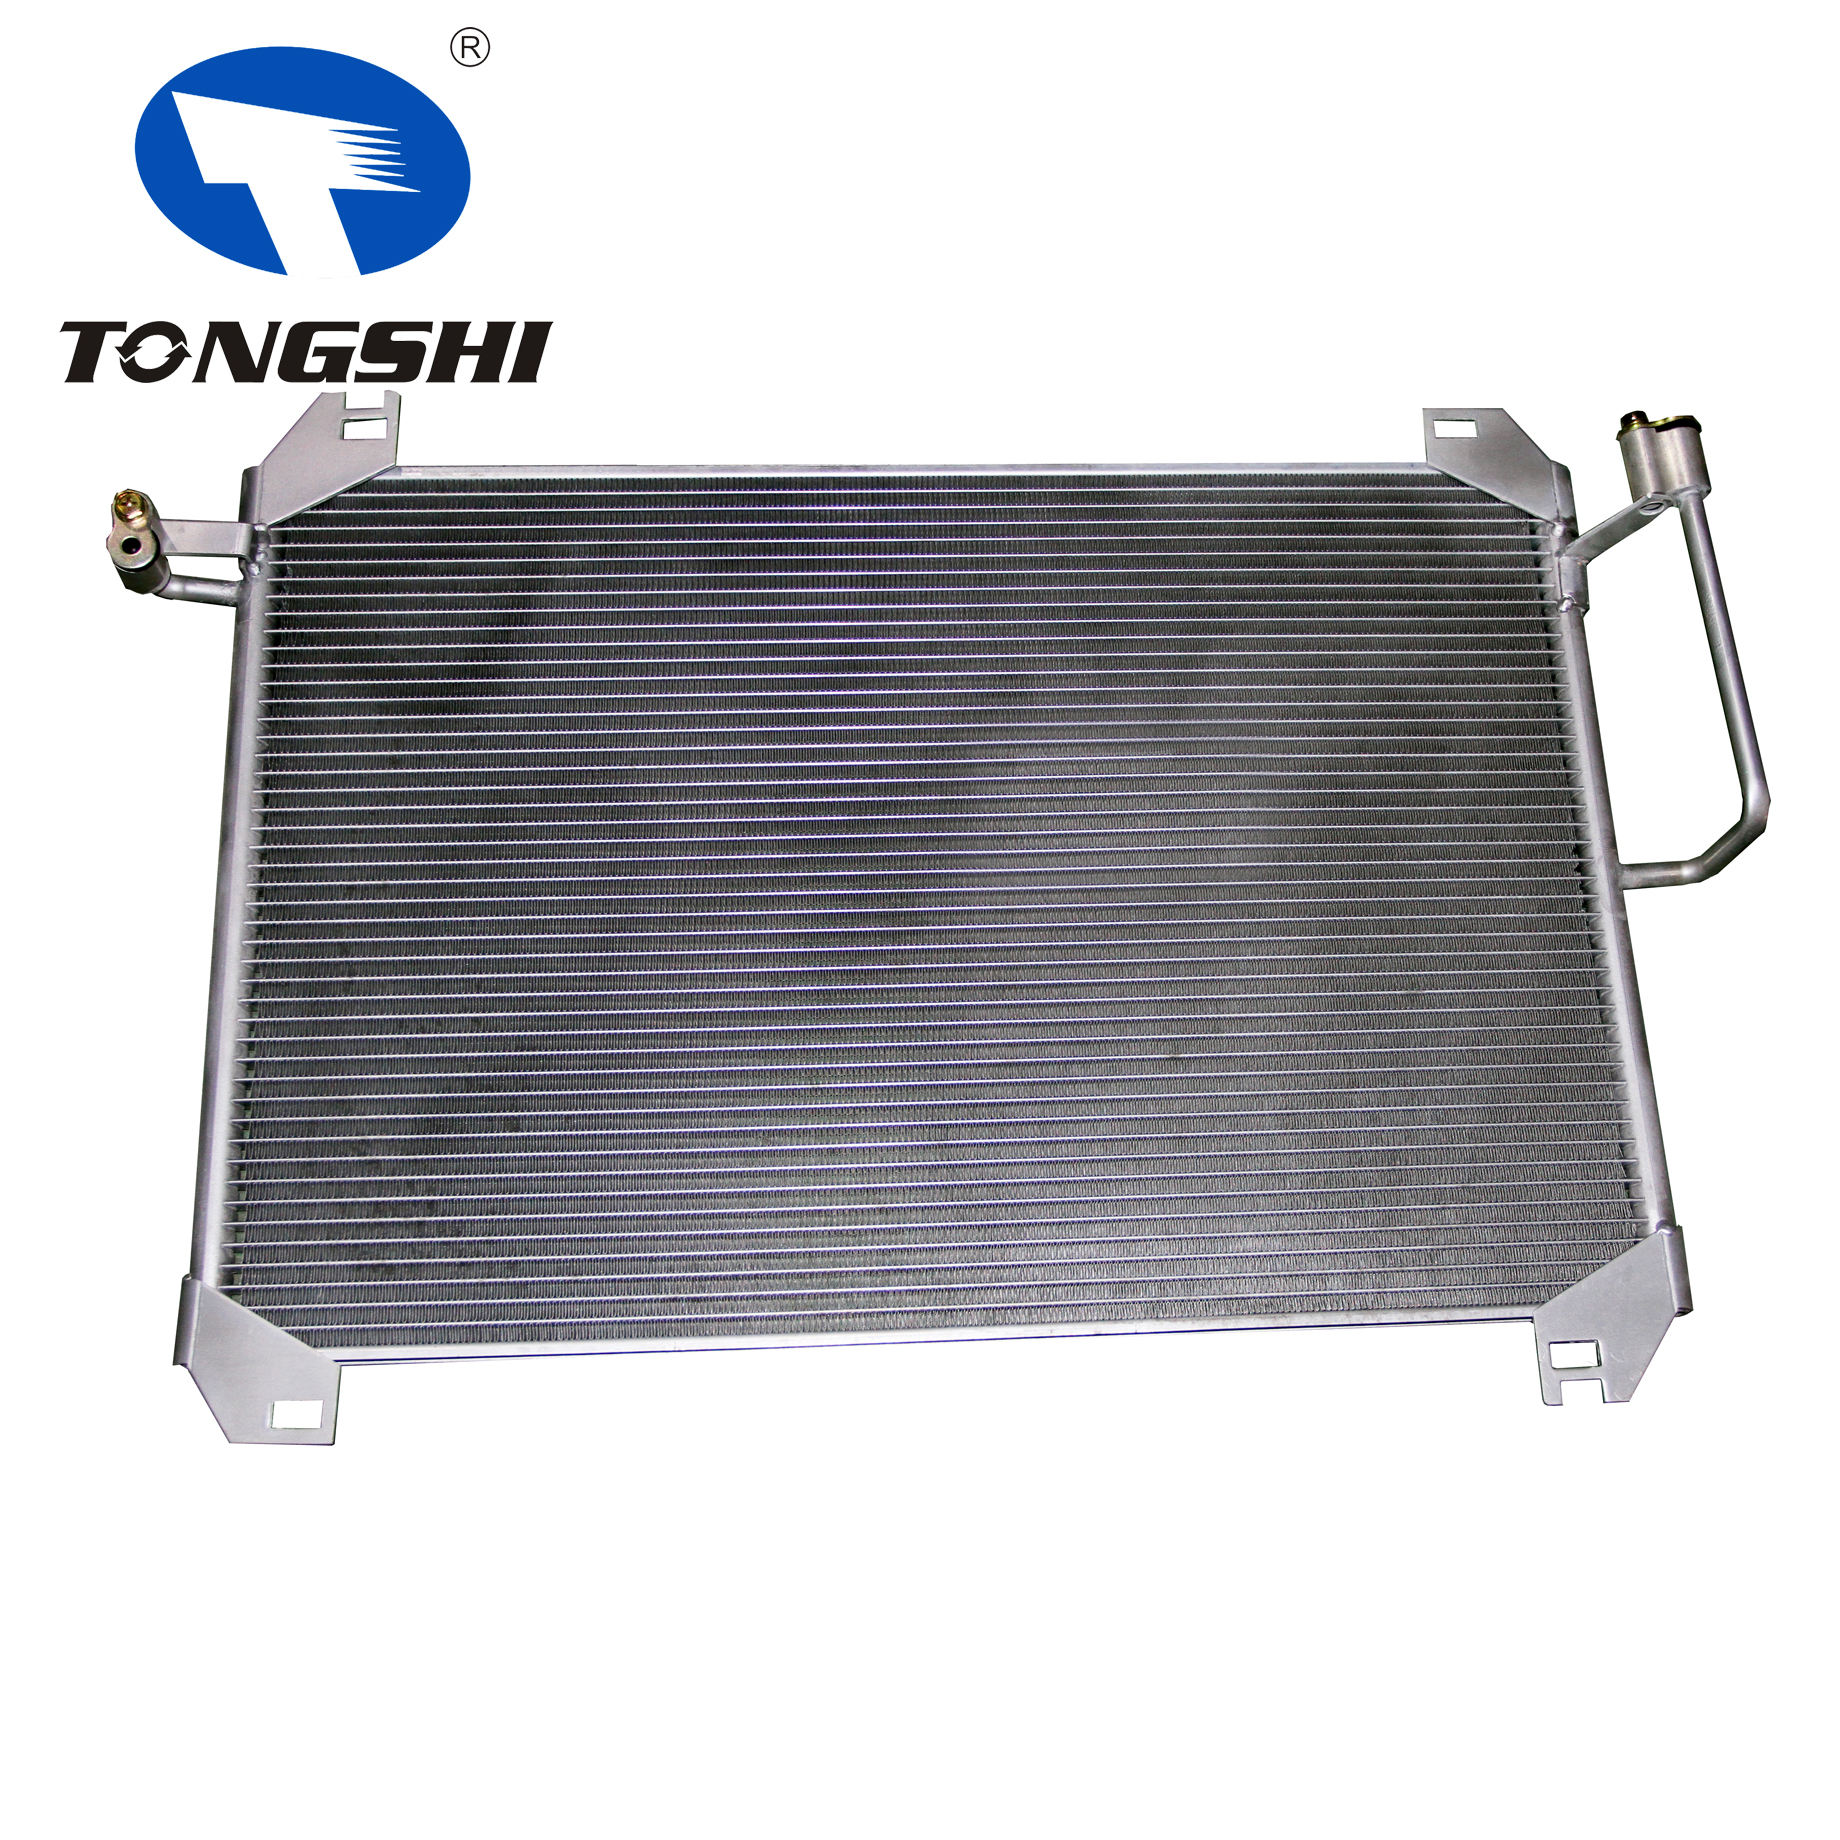 Air conditioning condenser assembly for GM MIDSIZE SUV/TRAILBLAZER/ENVOY 02-06 OEM52495585